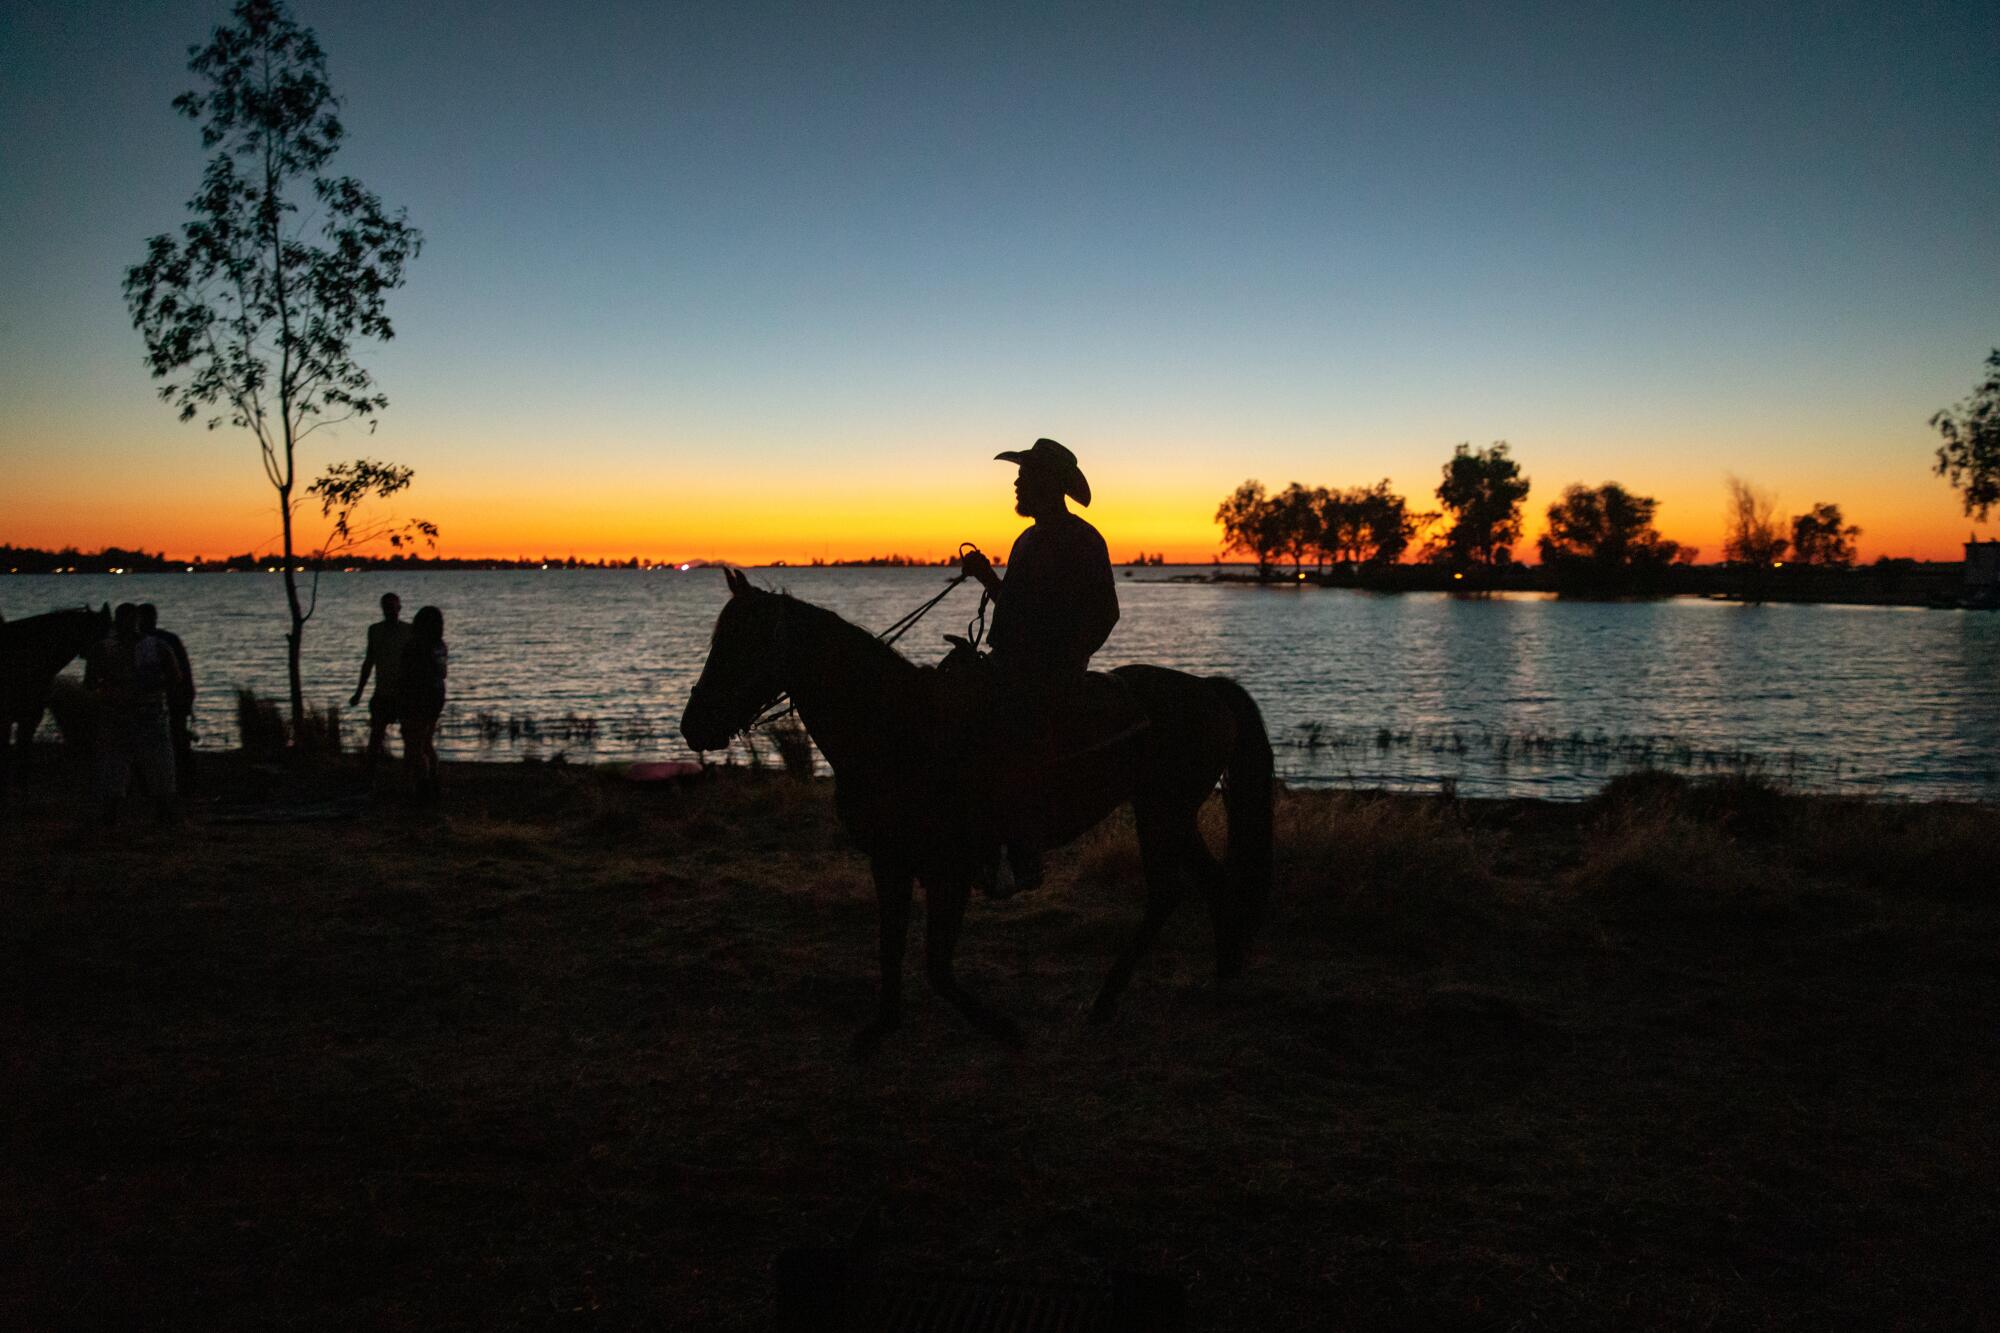 The silhouette of a cowboy on a horse against a body of water at sunset.